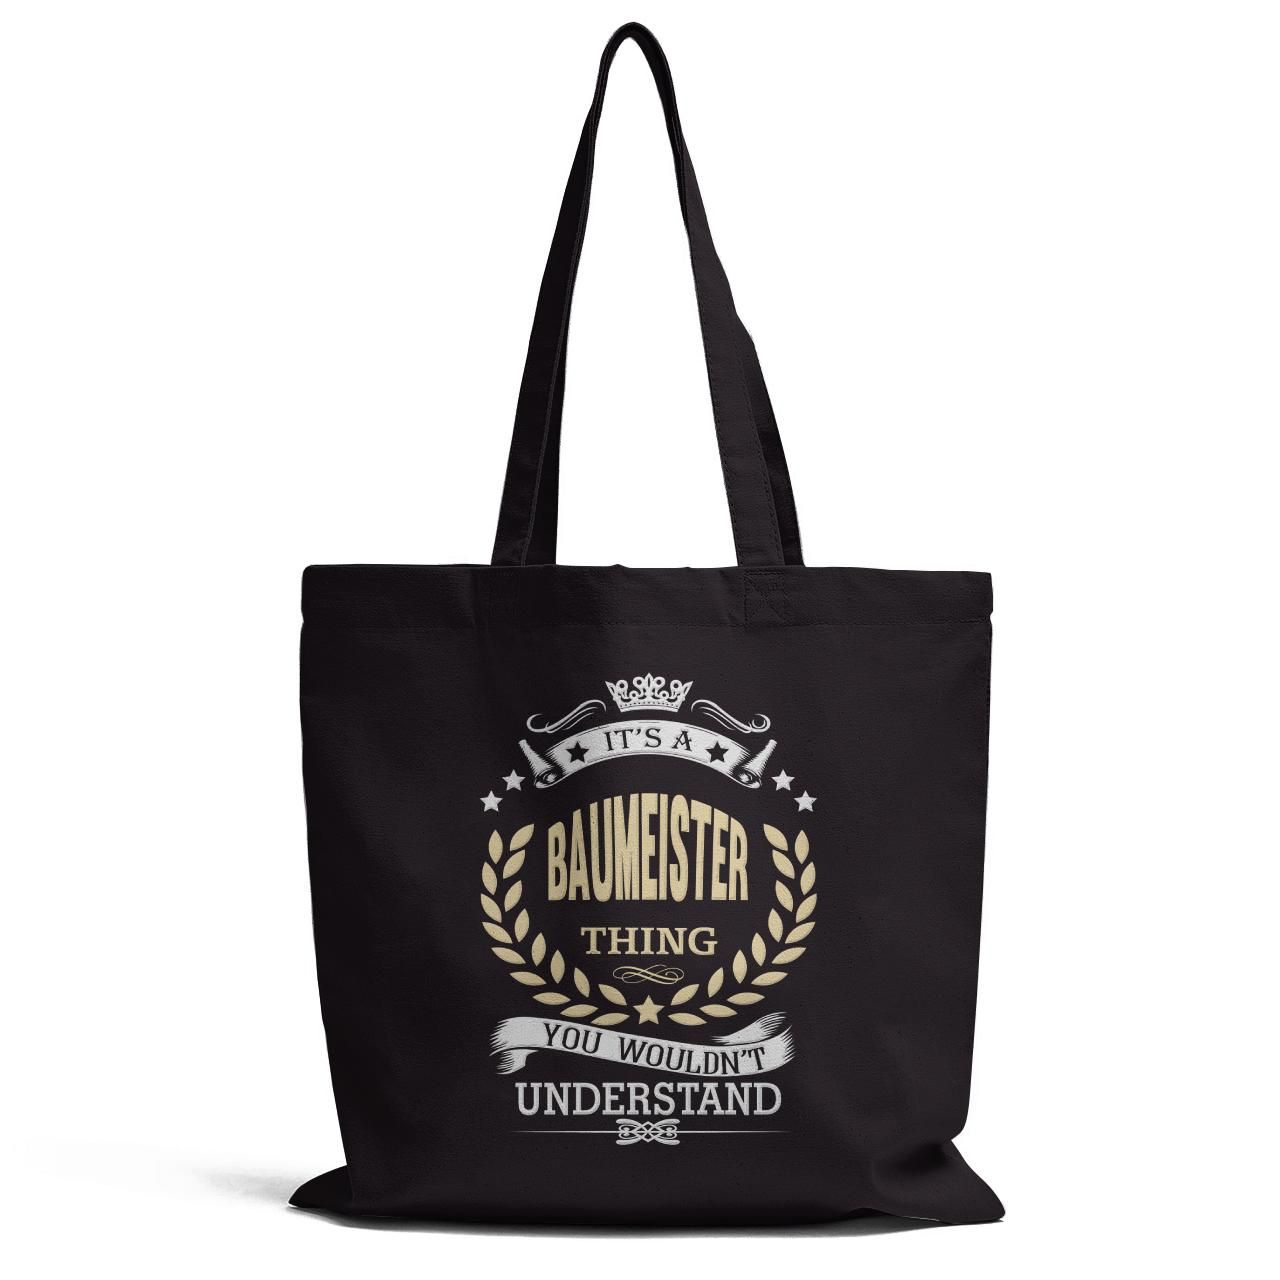 It Is A Baumeister Thing You Wound'S Understand Tote Bag